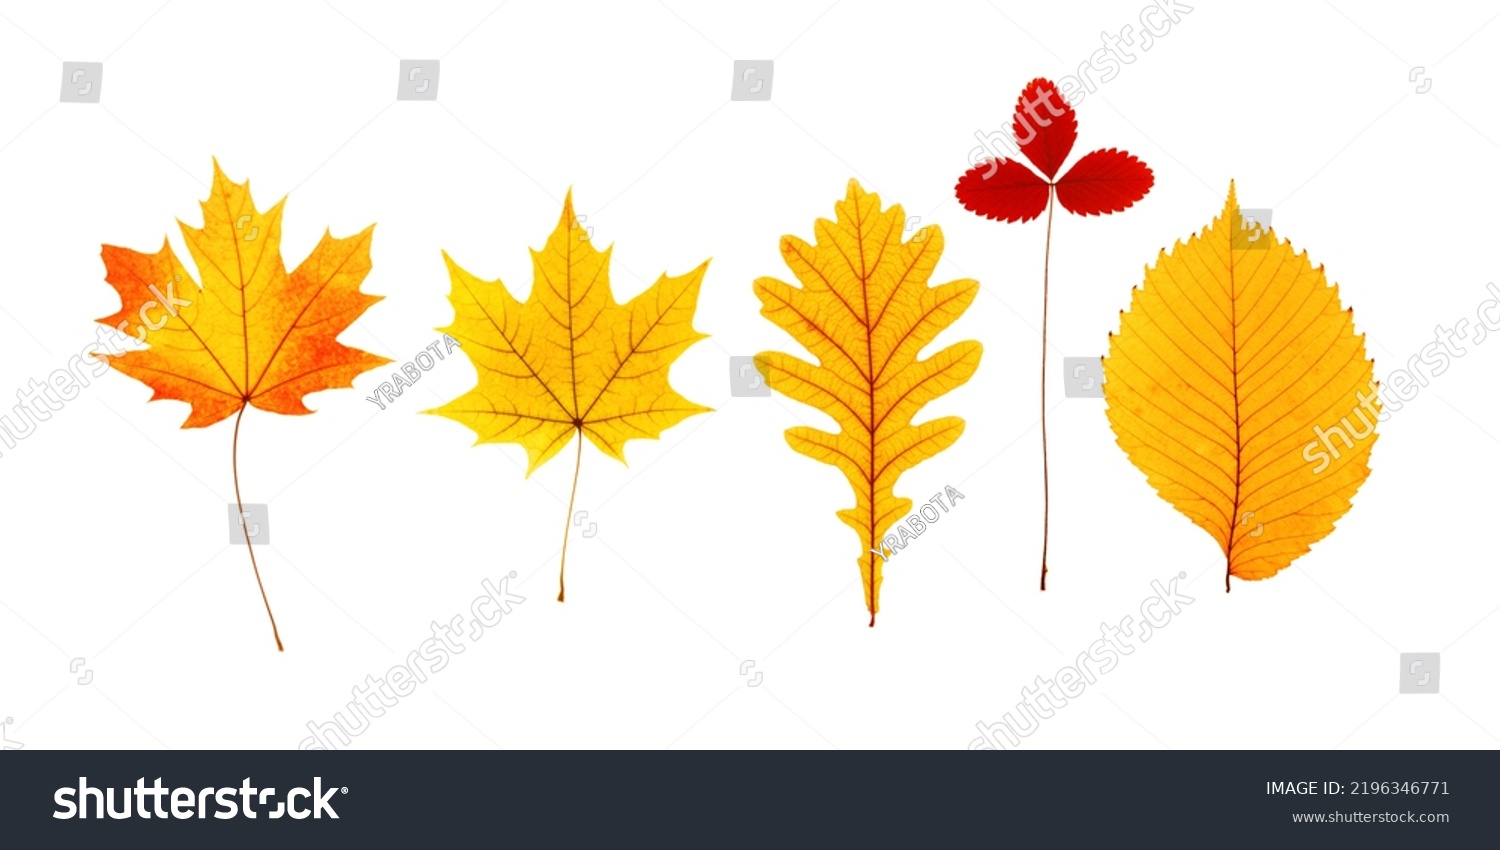 Set close up autumn red yellow leaves with natural texture isolated on white background. Natural fallen autumn leaves of maple, oak, alder, strawberry as decorative element. Seasonal fall herbarium #2196346771